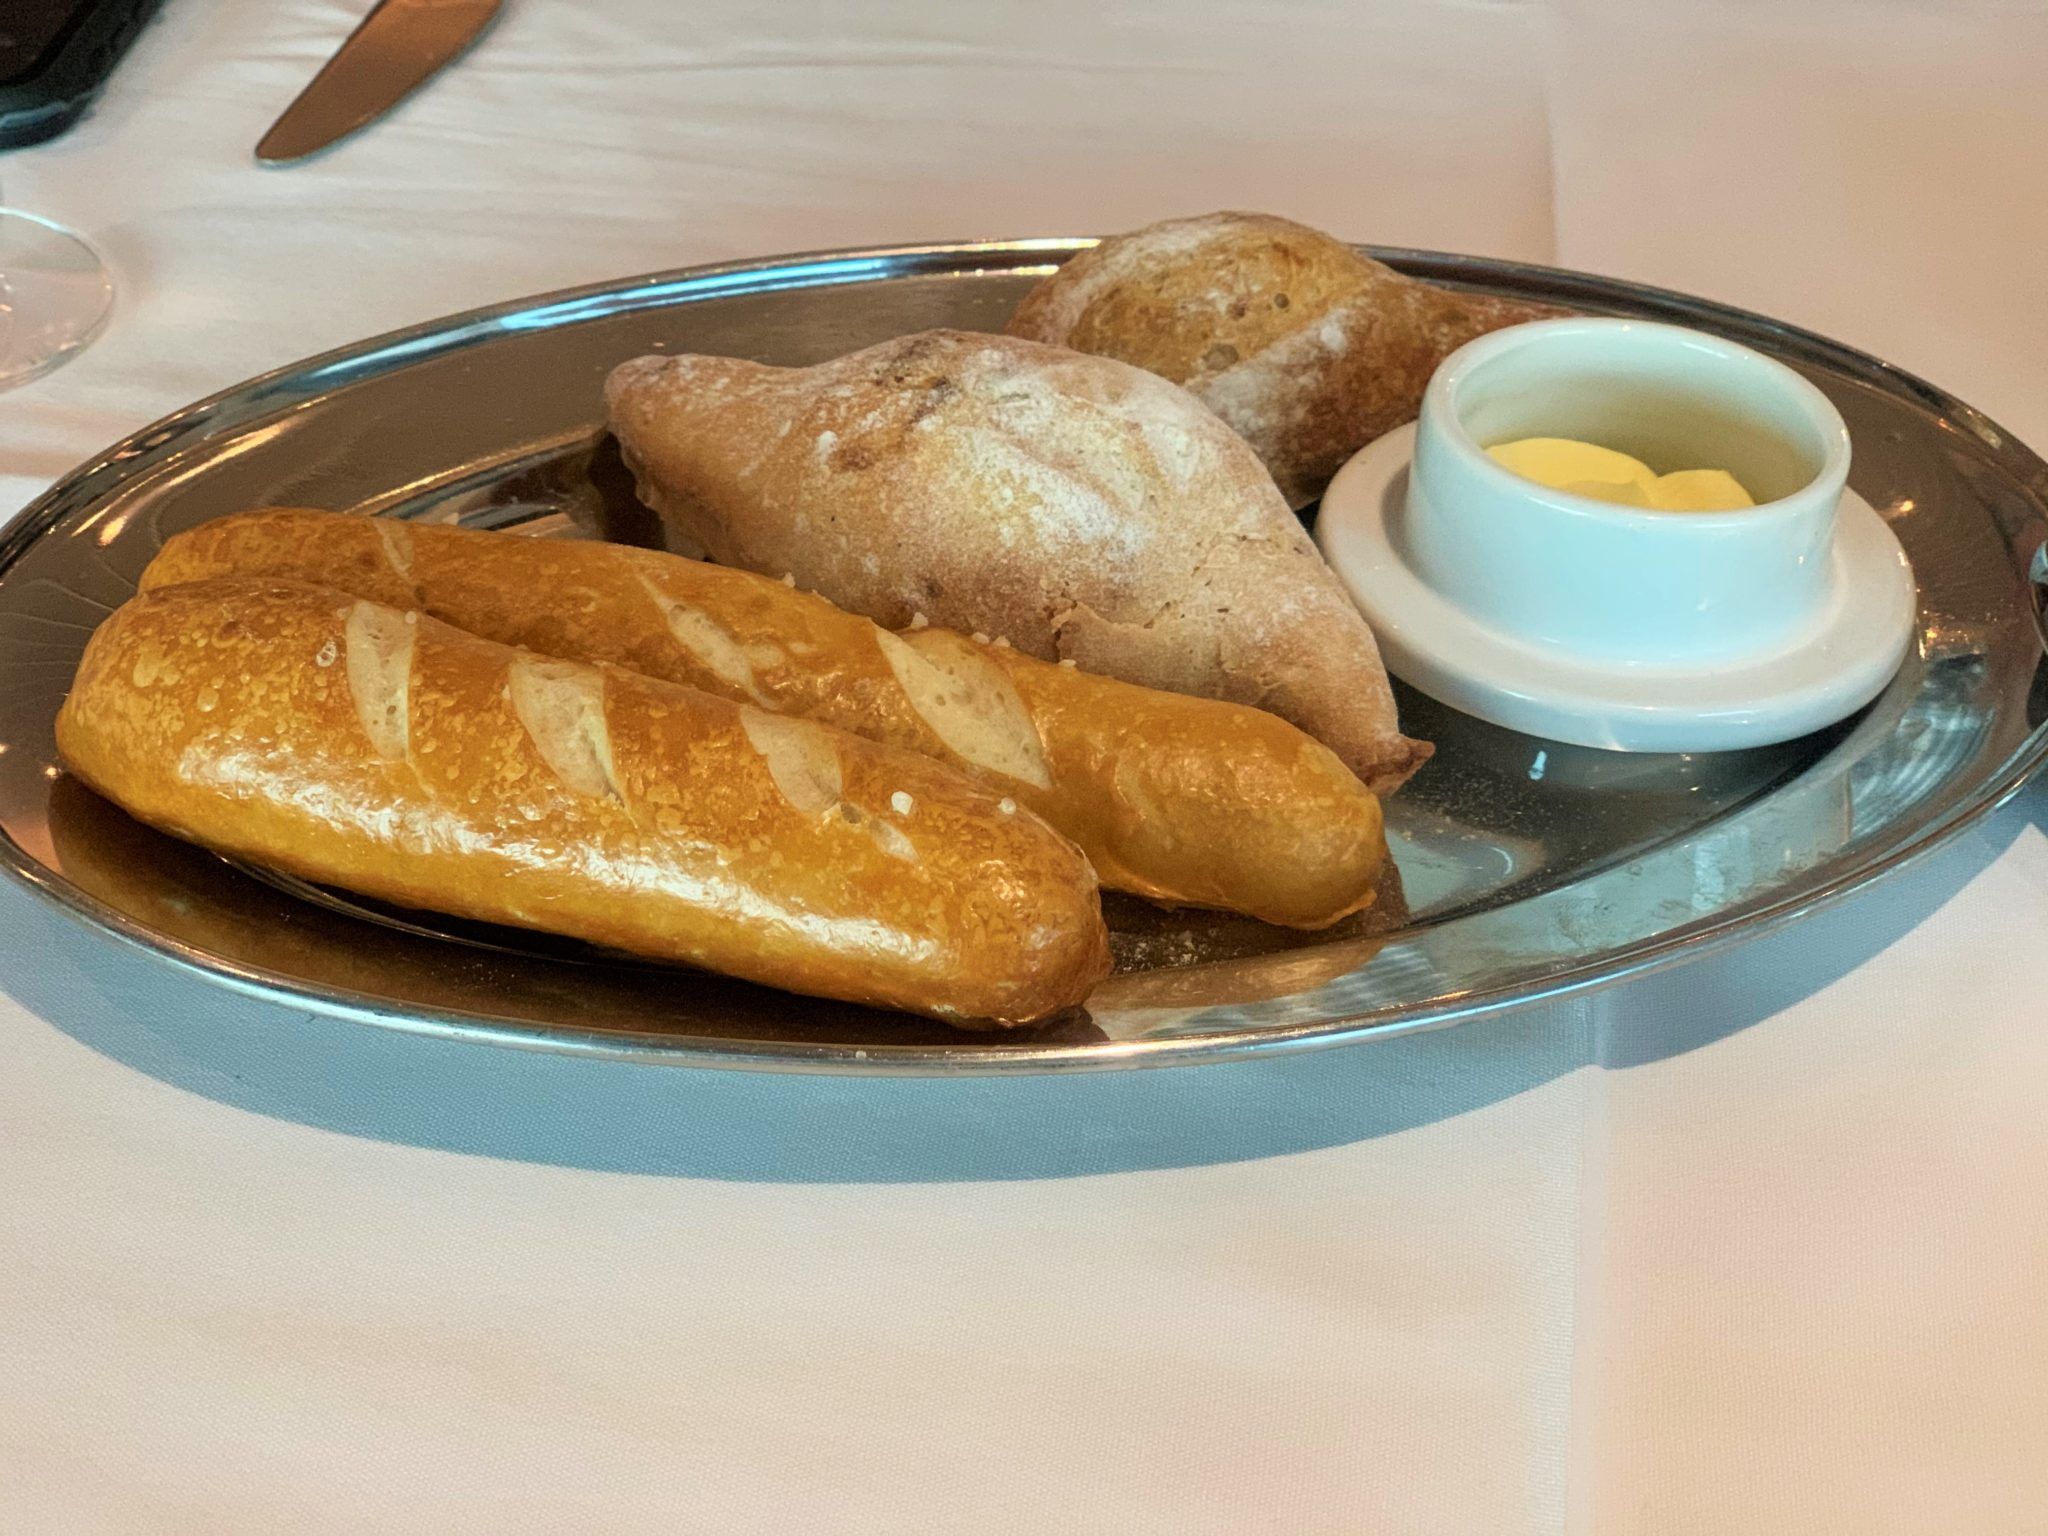 Bread selection at Chops Grille on Freedom of the Seas